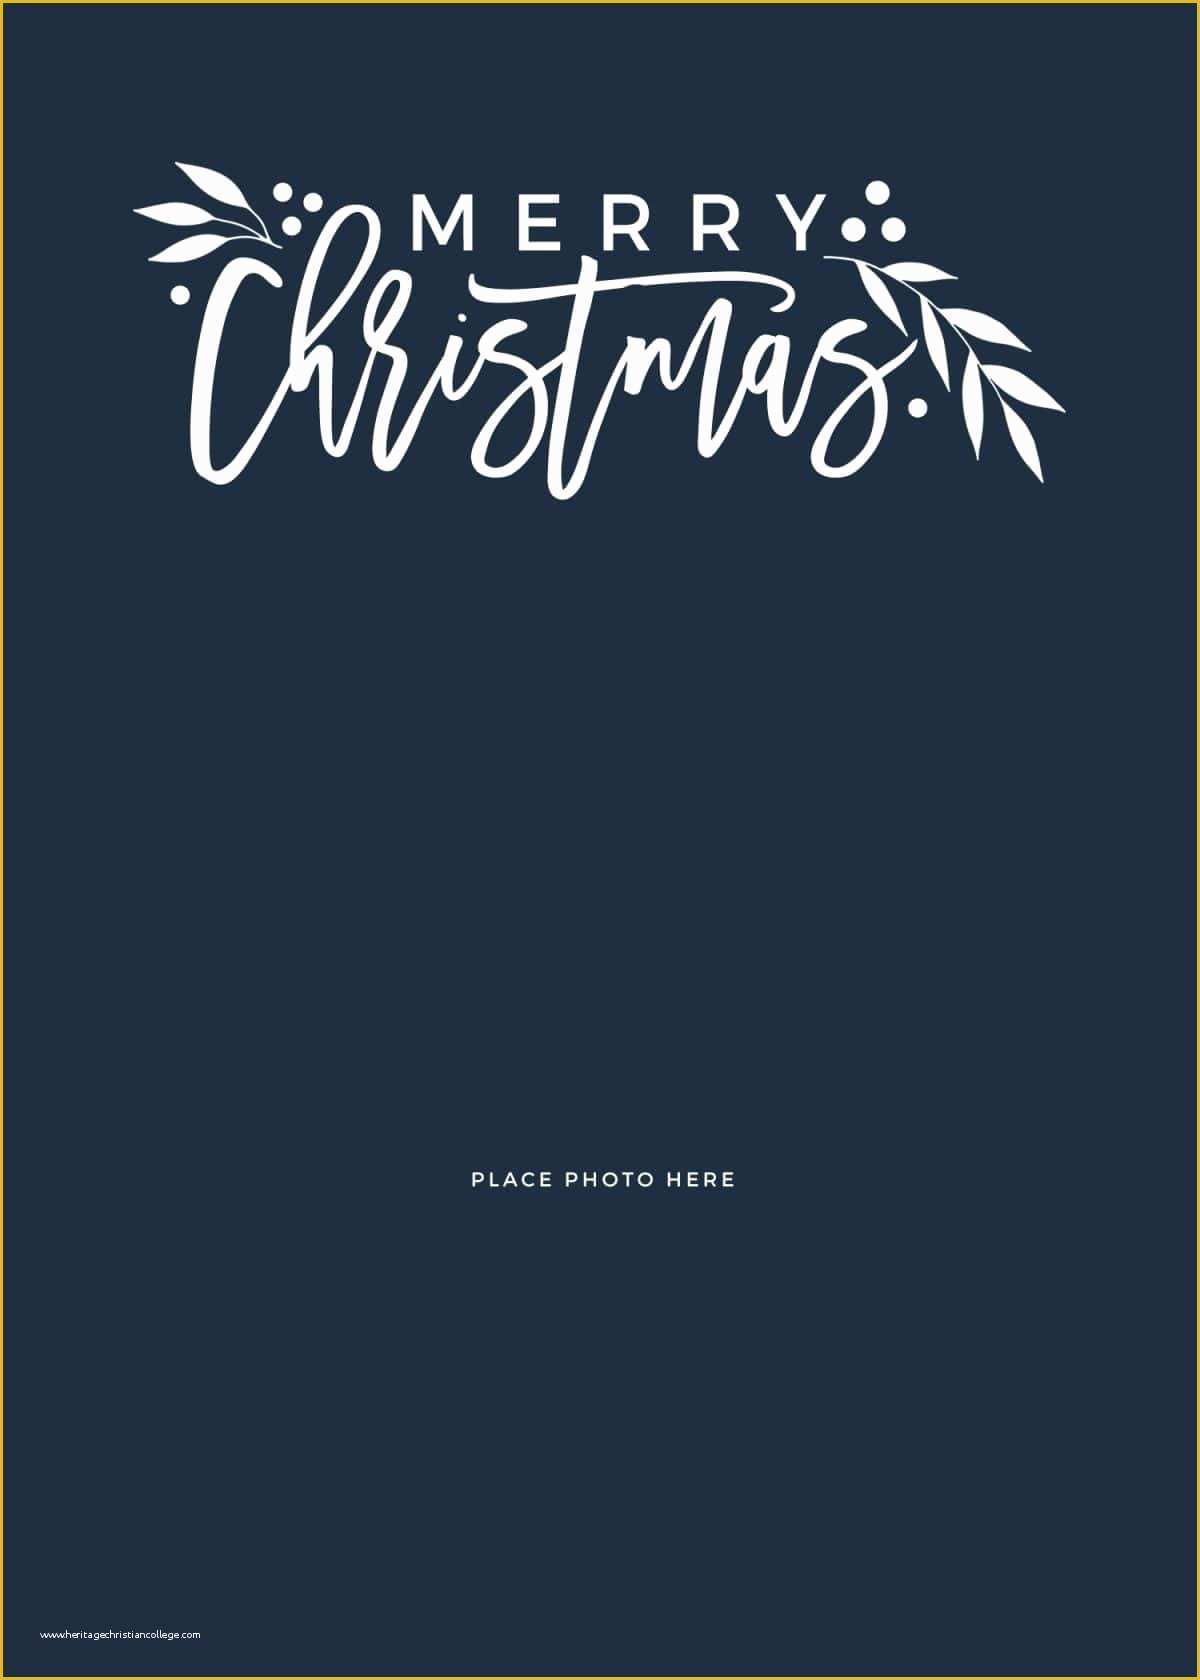 Free Photo Templates Of Make Your Own Christmas Cards for Free somewhat